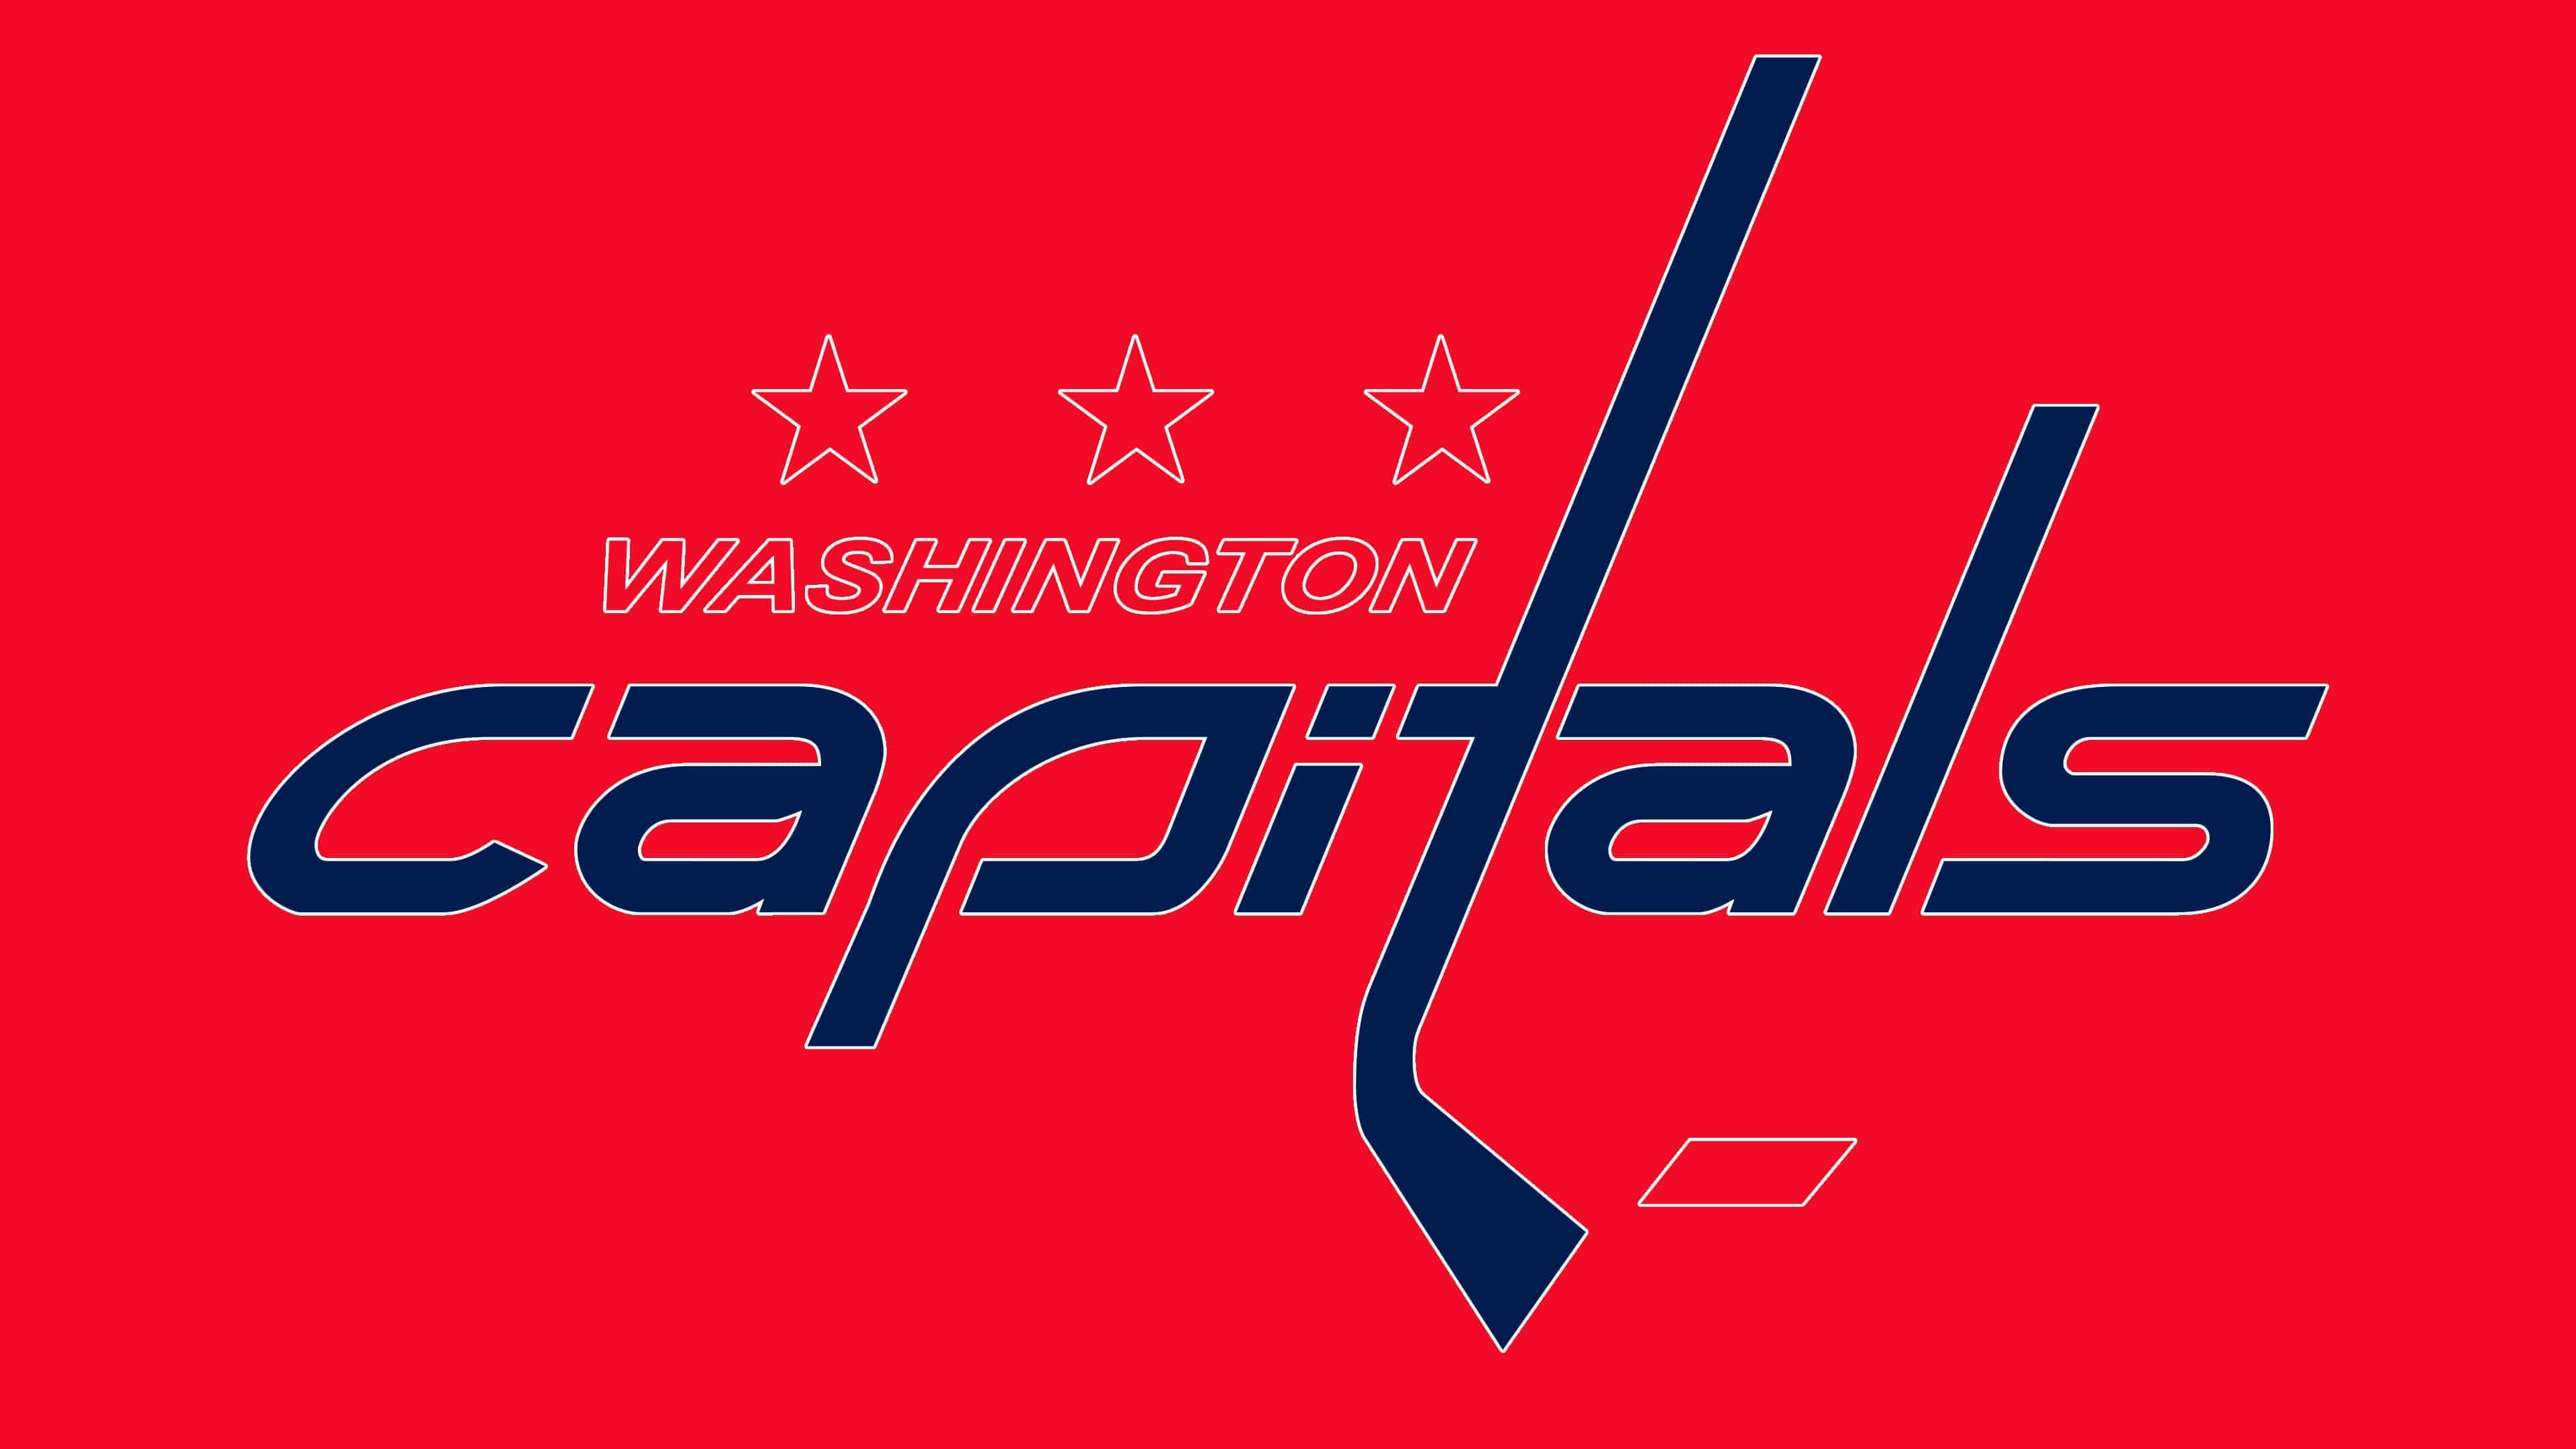 The Washington Capitals banner raising was about as 